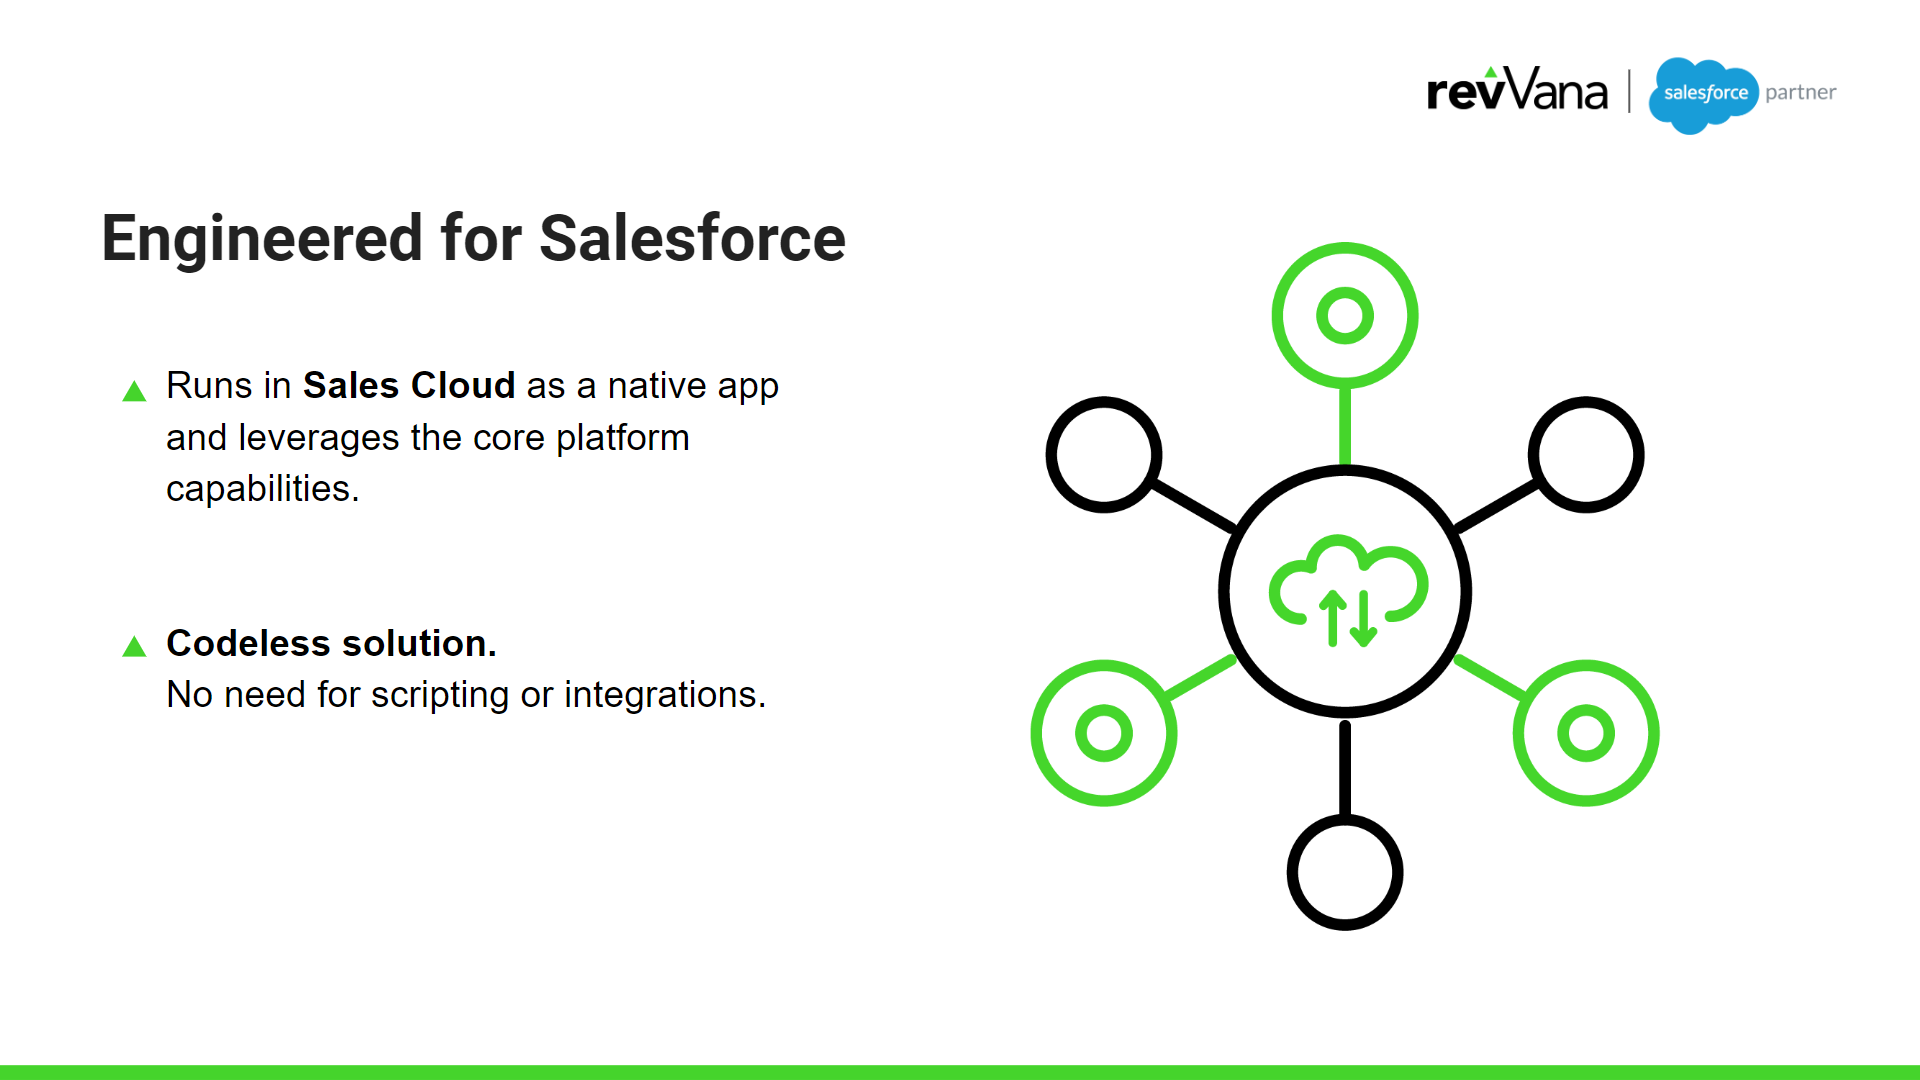 Revenue Forecasting Engineered for Salesforce